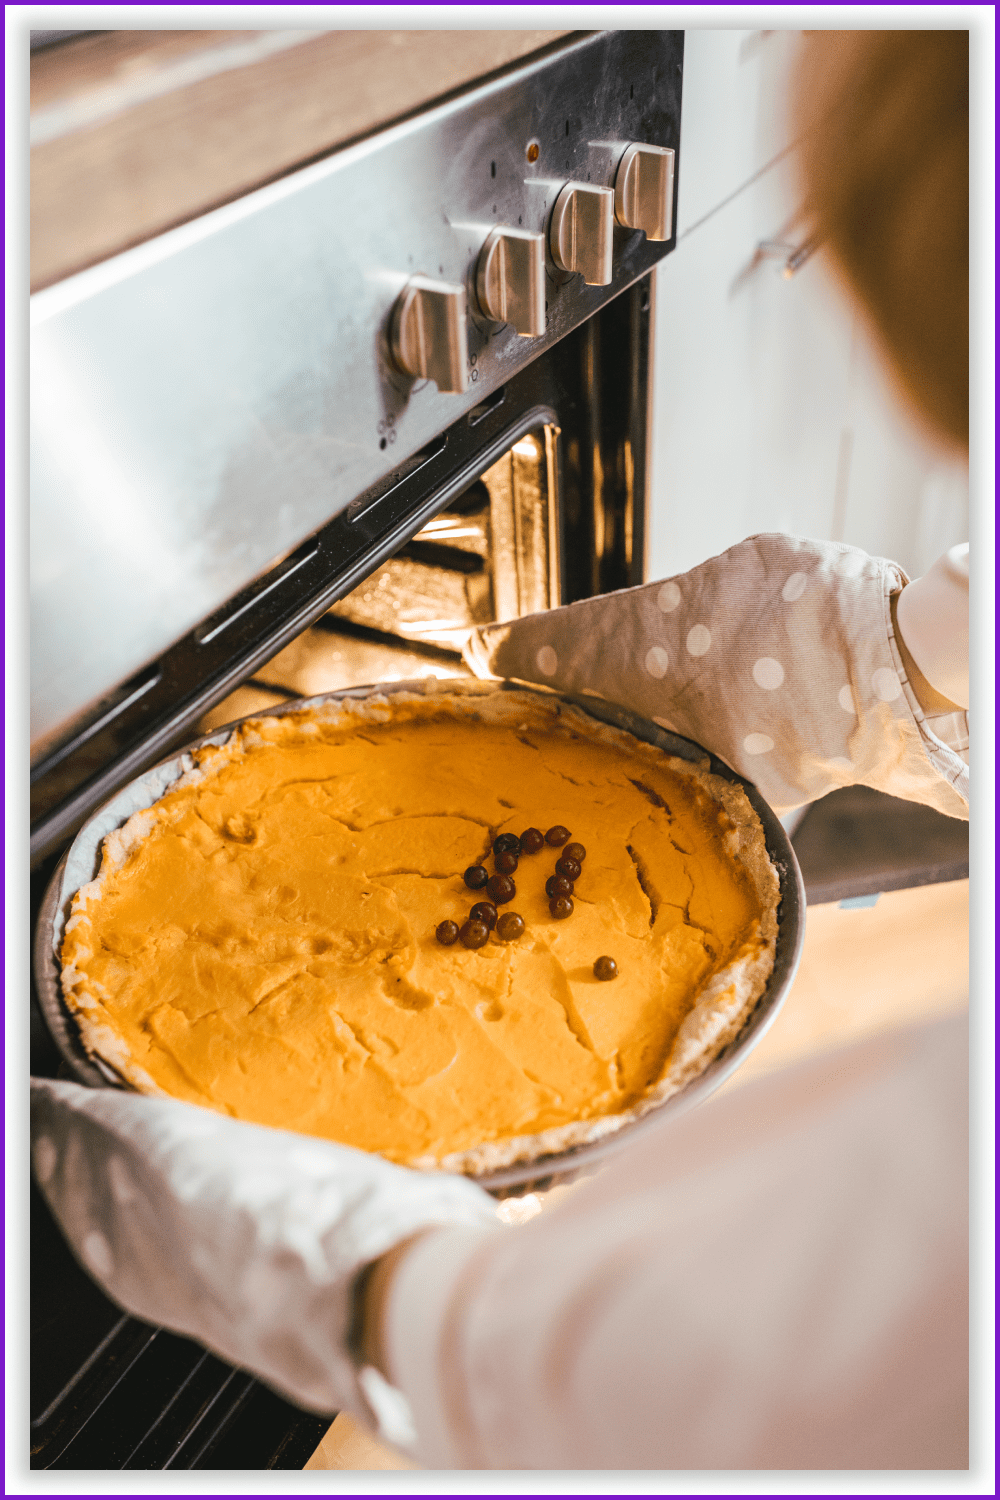 Woman in kitchen gloves taking a pumpkin pie out of the oven.